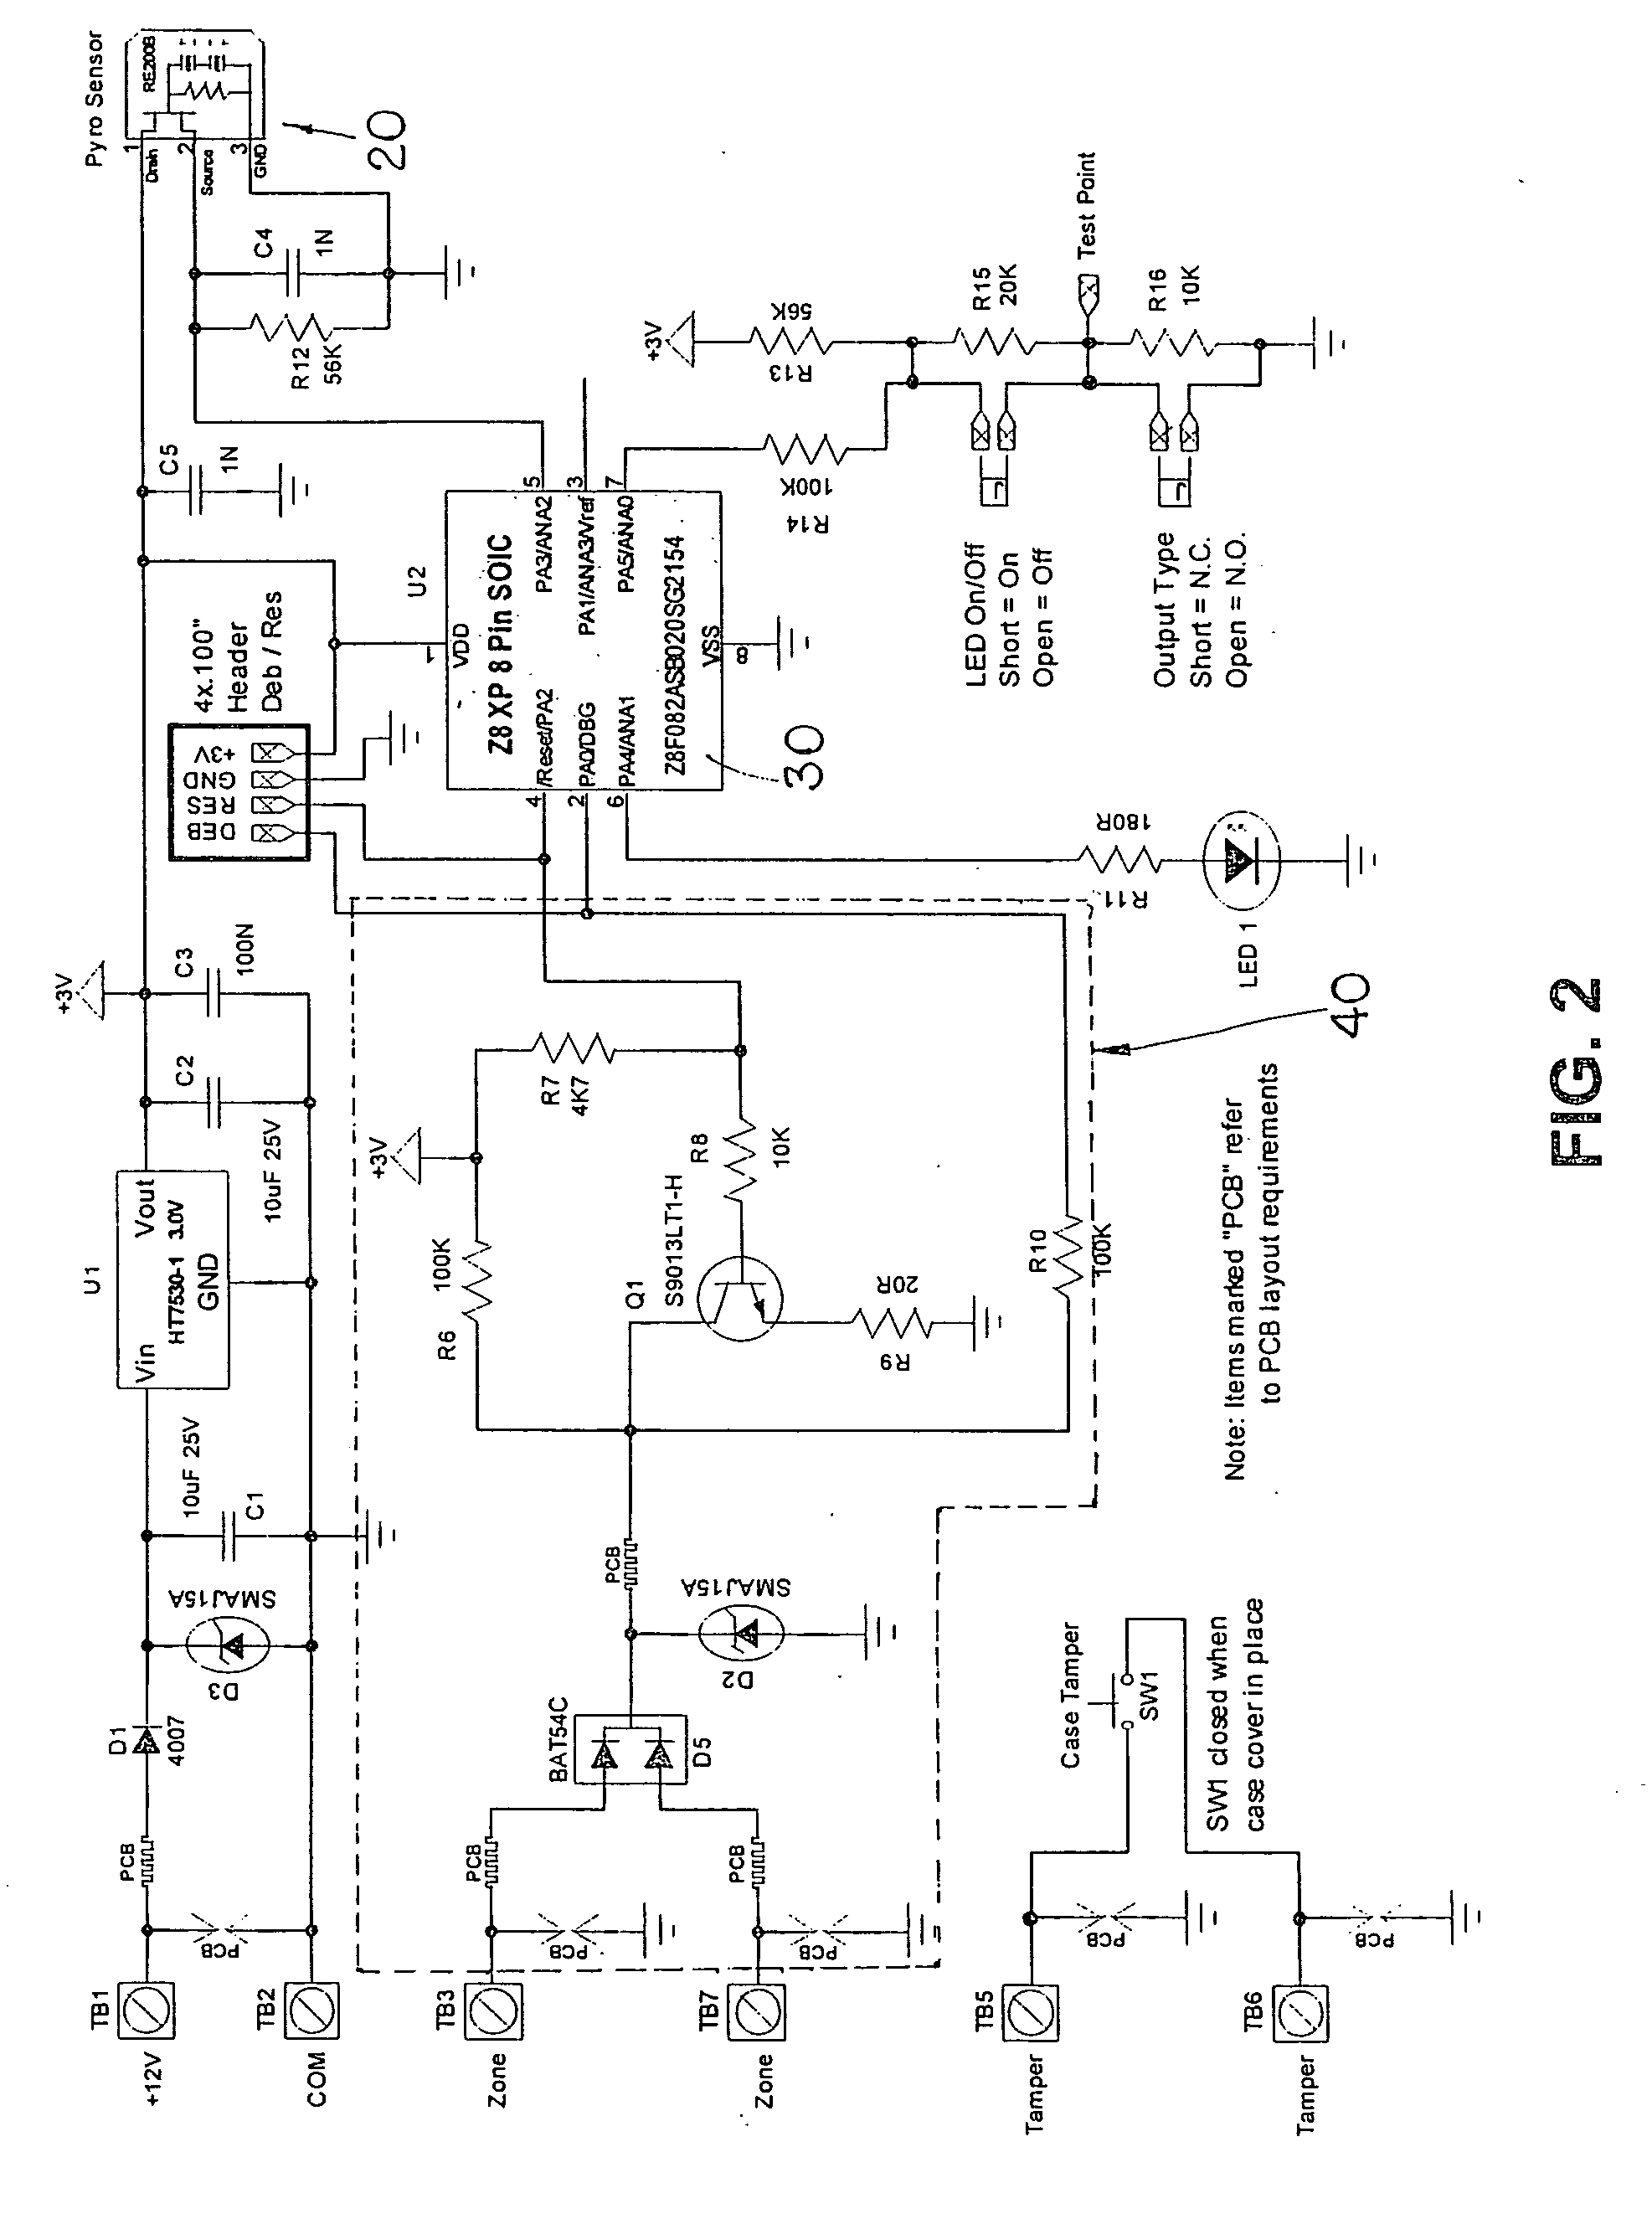 Process and system of energy signal detection